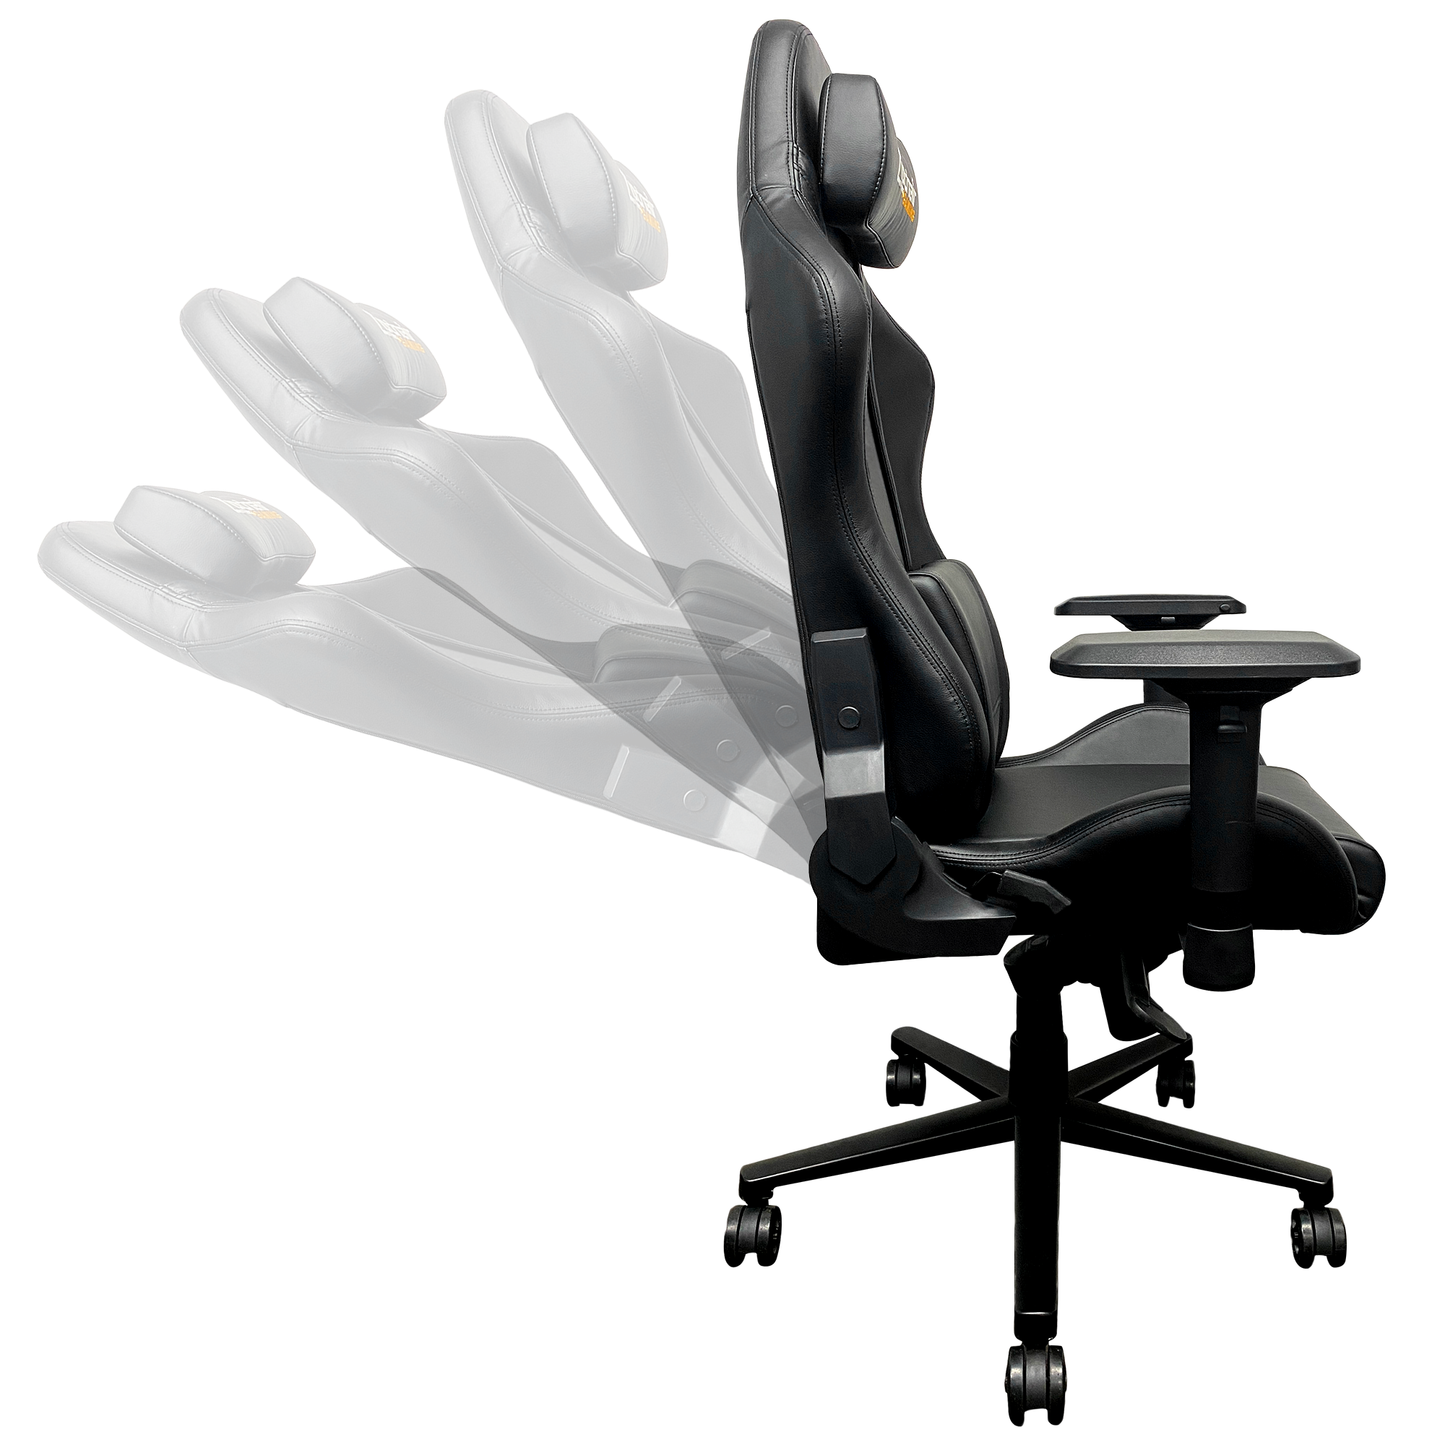 Xpression Pro Gaming Chair with Vanderbilt Commodores Secondary